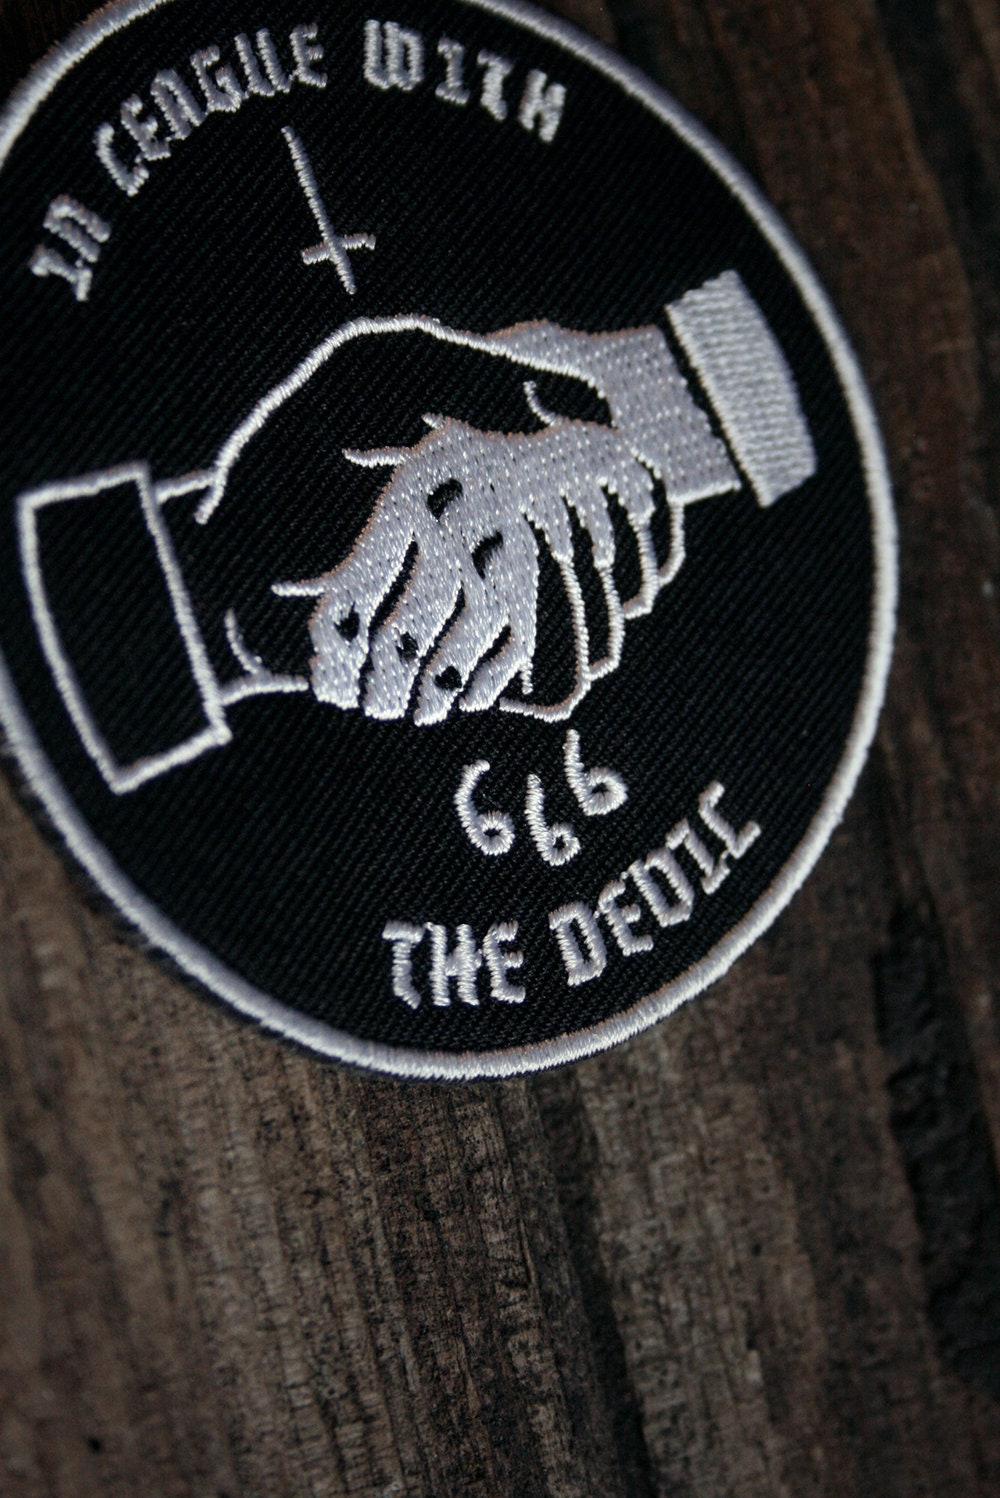 In league with the devil, 666 - PATCH